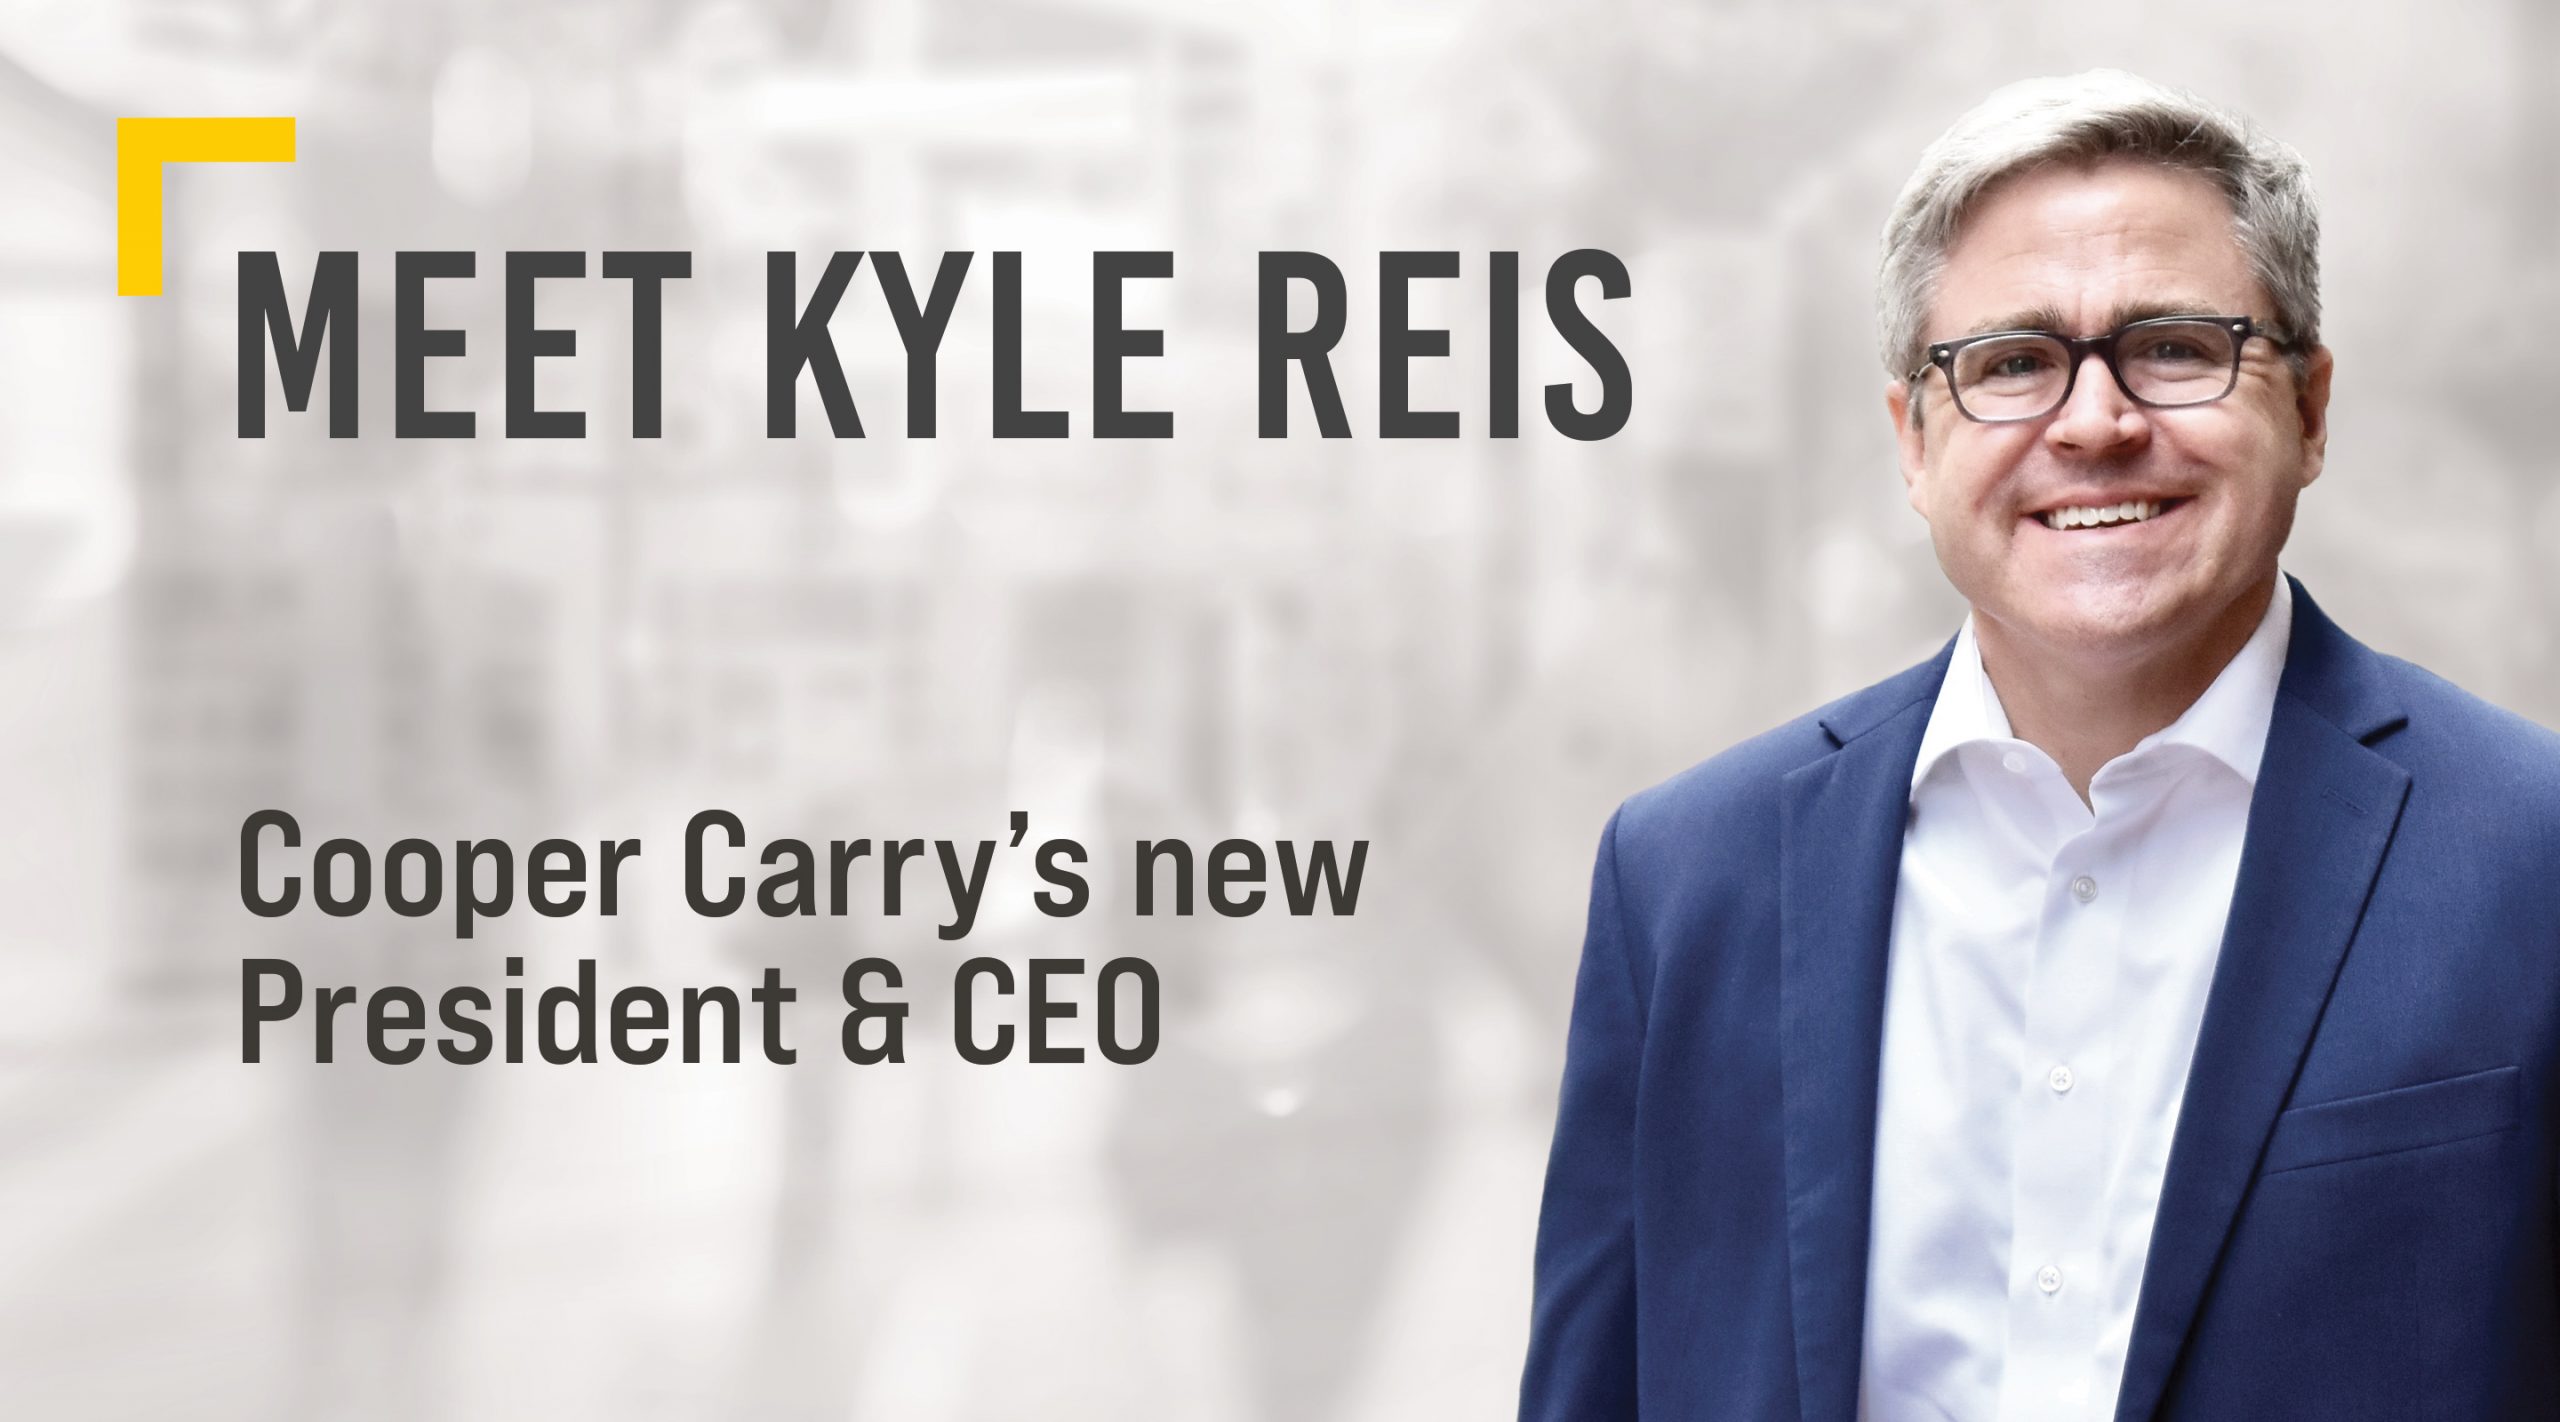 kyle reis cooper carry ceo